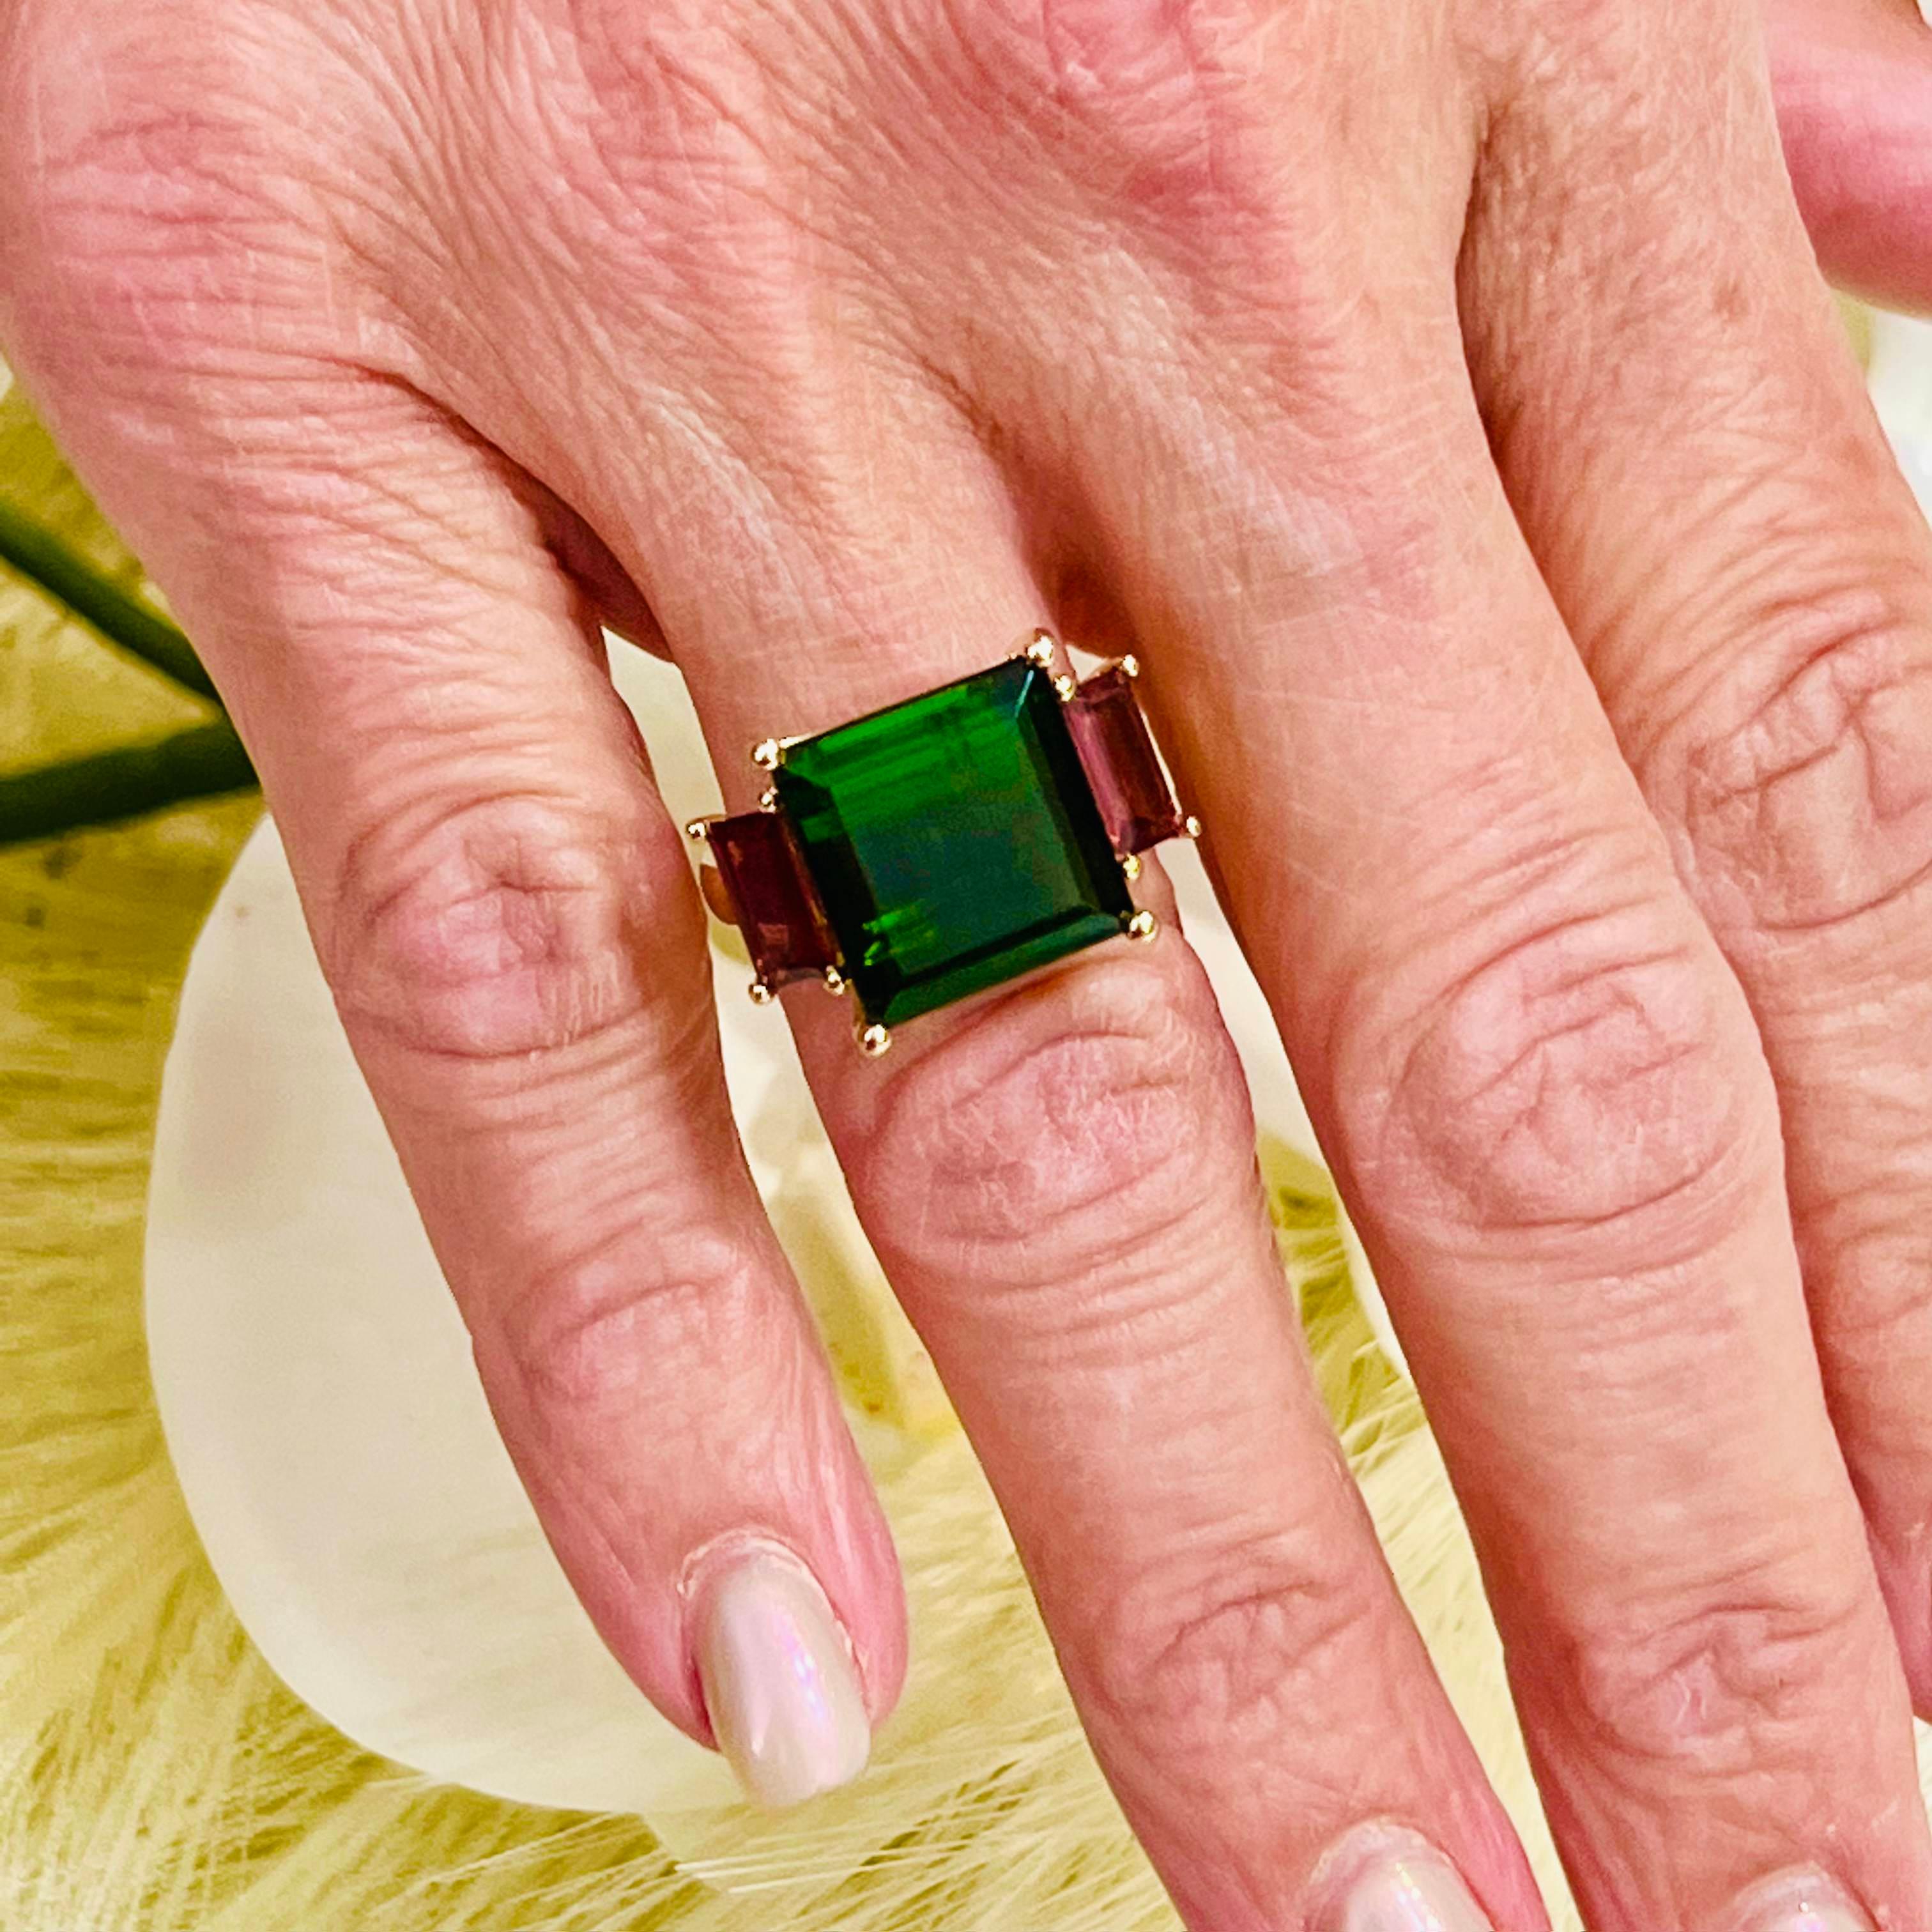 Natural Finely Faceted Quality Tourmaline Diamond Ring Size 7 14 Y Gold 12.25 TCW Certified $7,950 219227

This is a one of a Kind Unique Custom Made Glamorous Piece of Jewelry!

Nothing says, “I Love you” more than Diamonds and Pearls!

This item